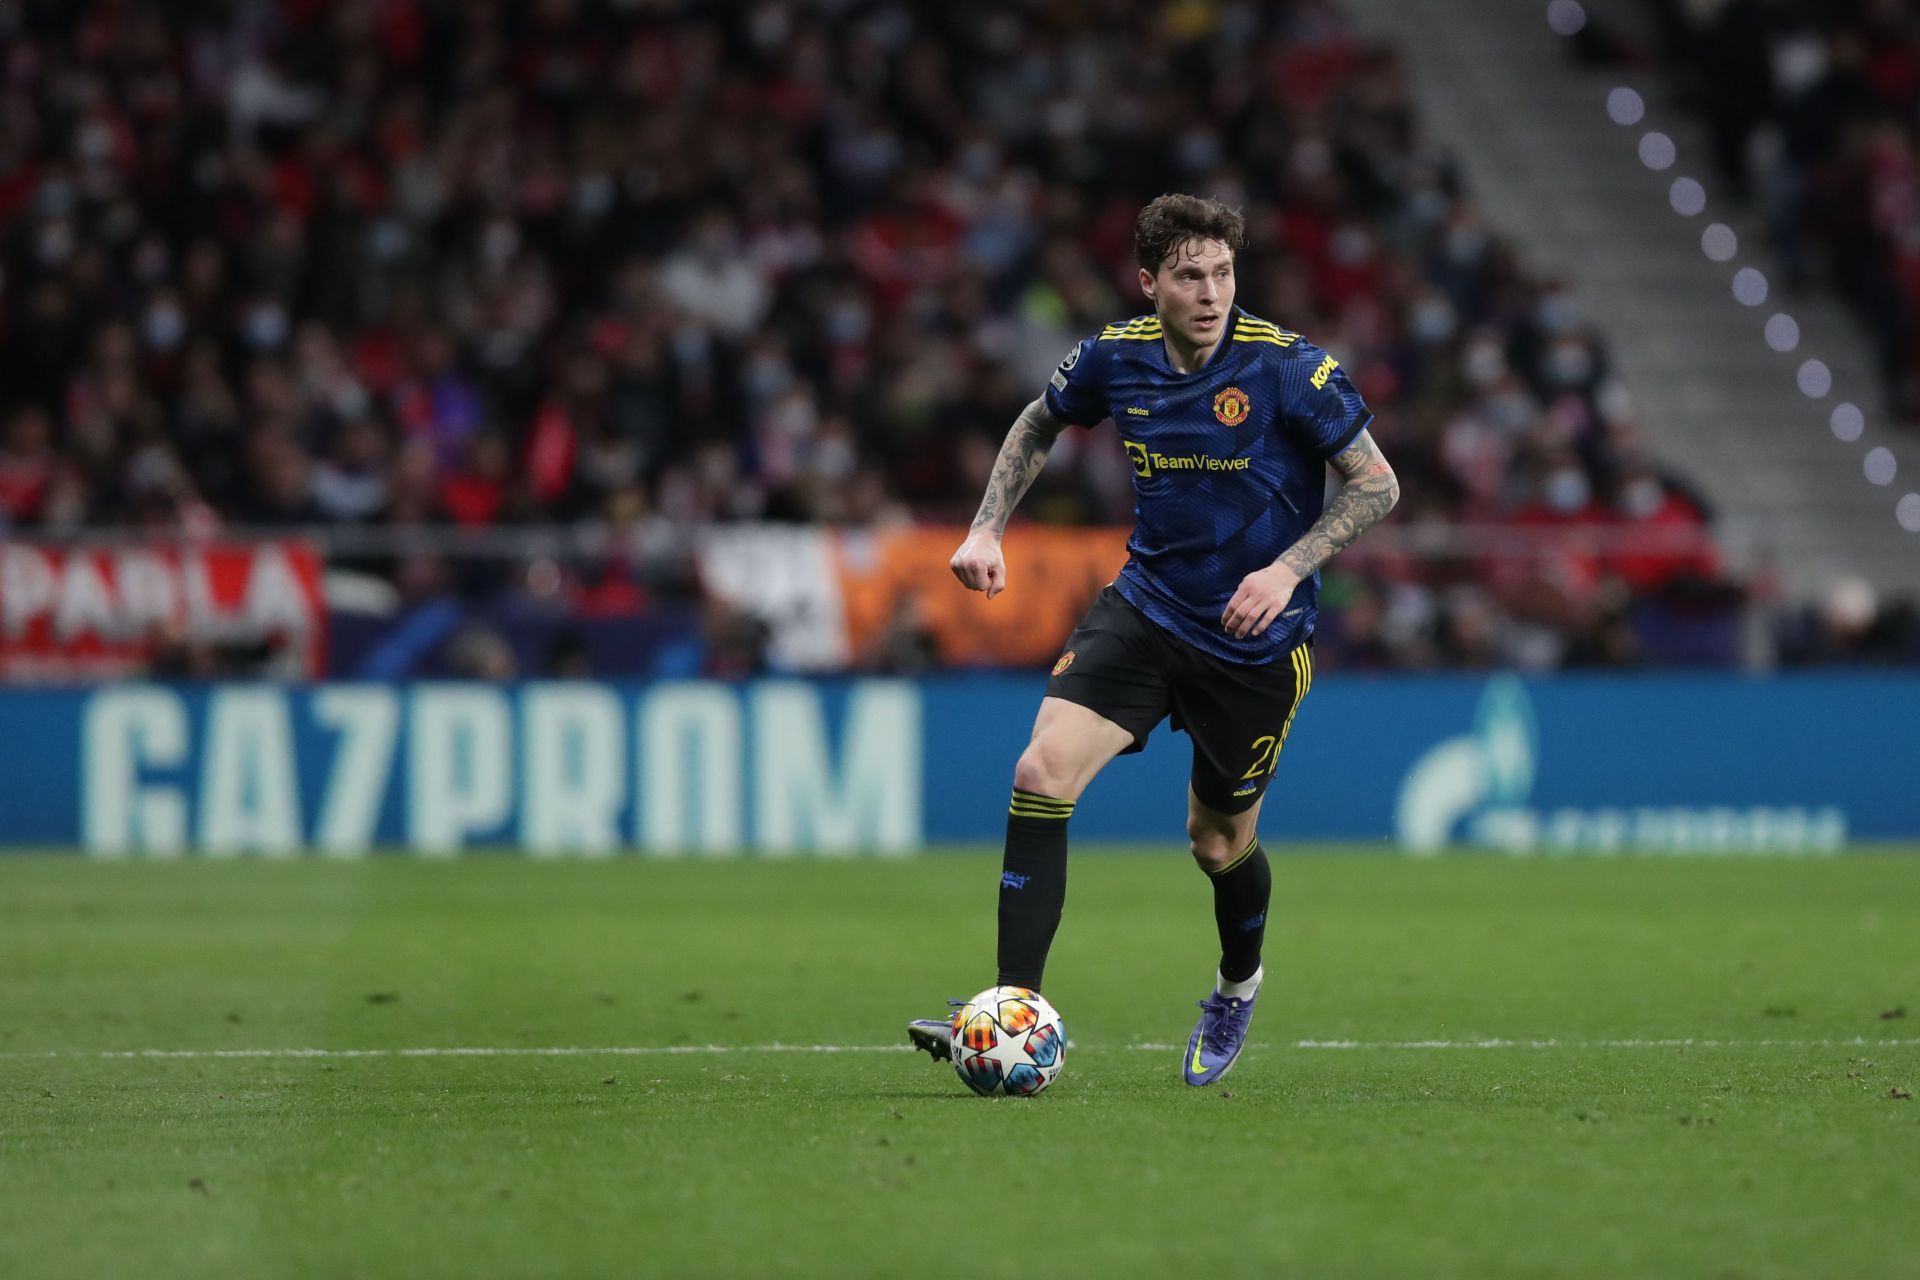 Lindelof would be looking to make amends for his mistake in the game against City